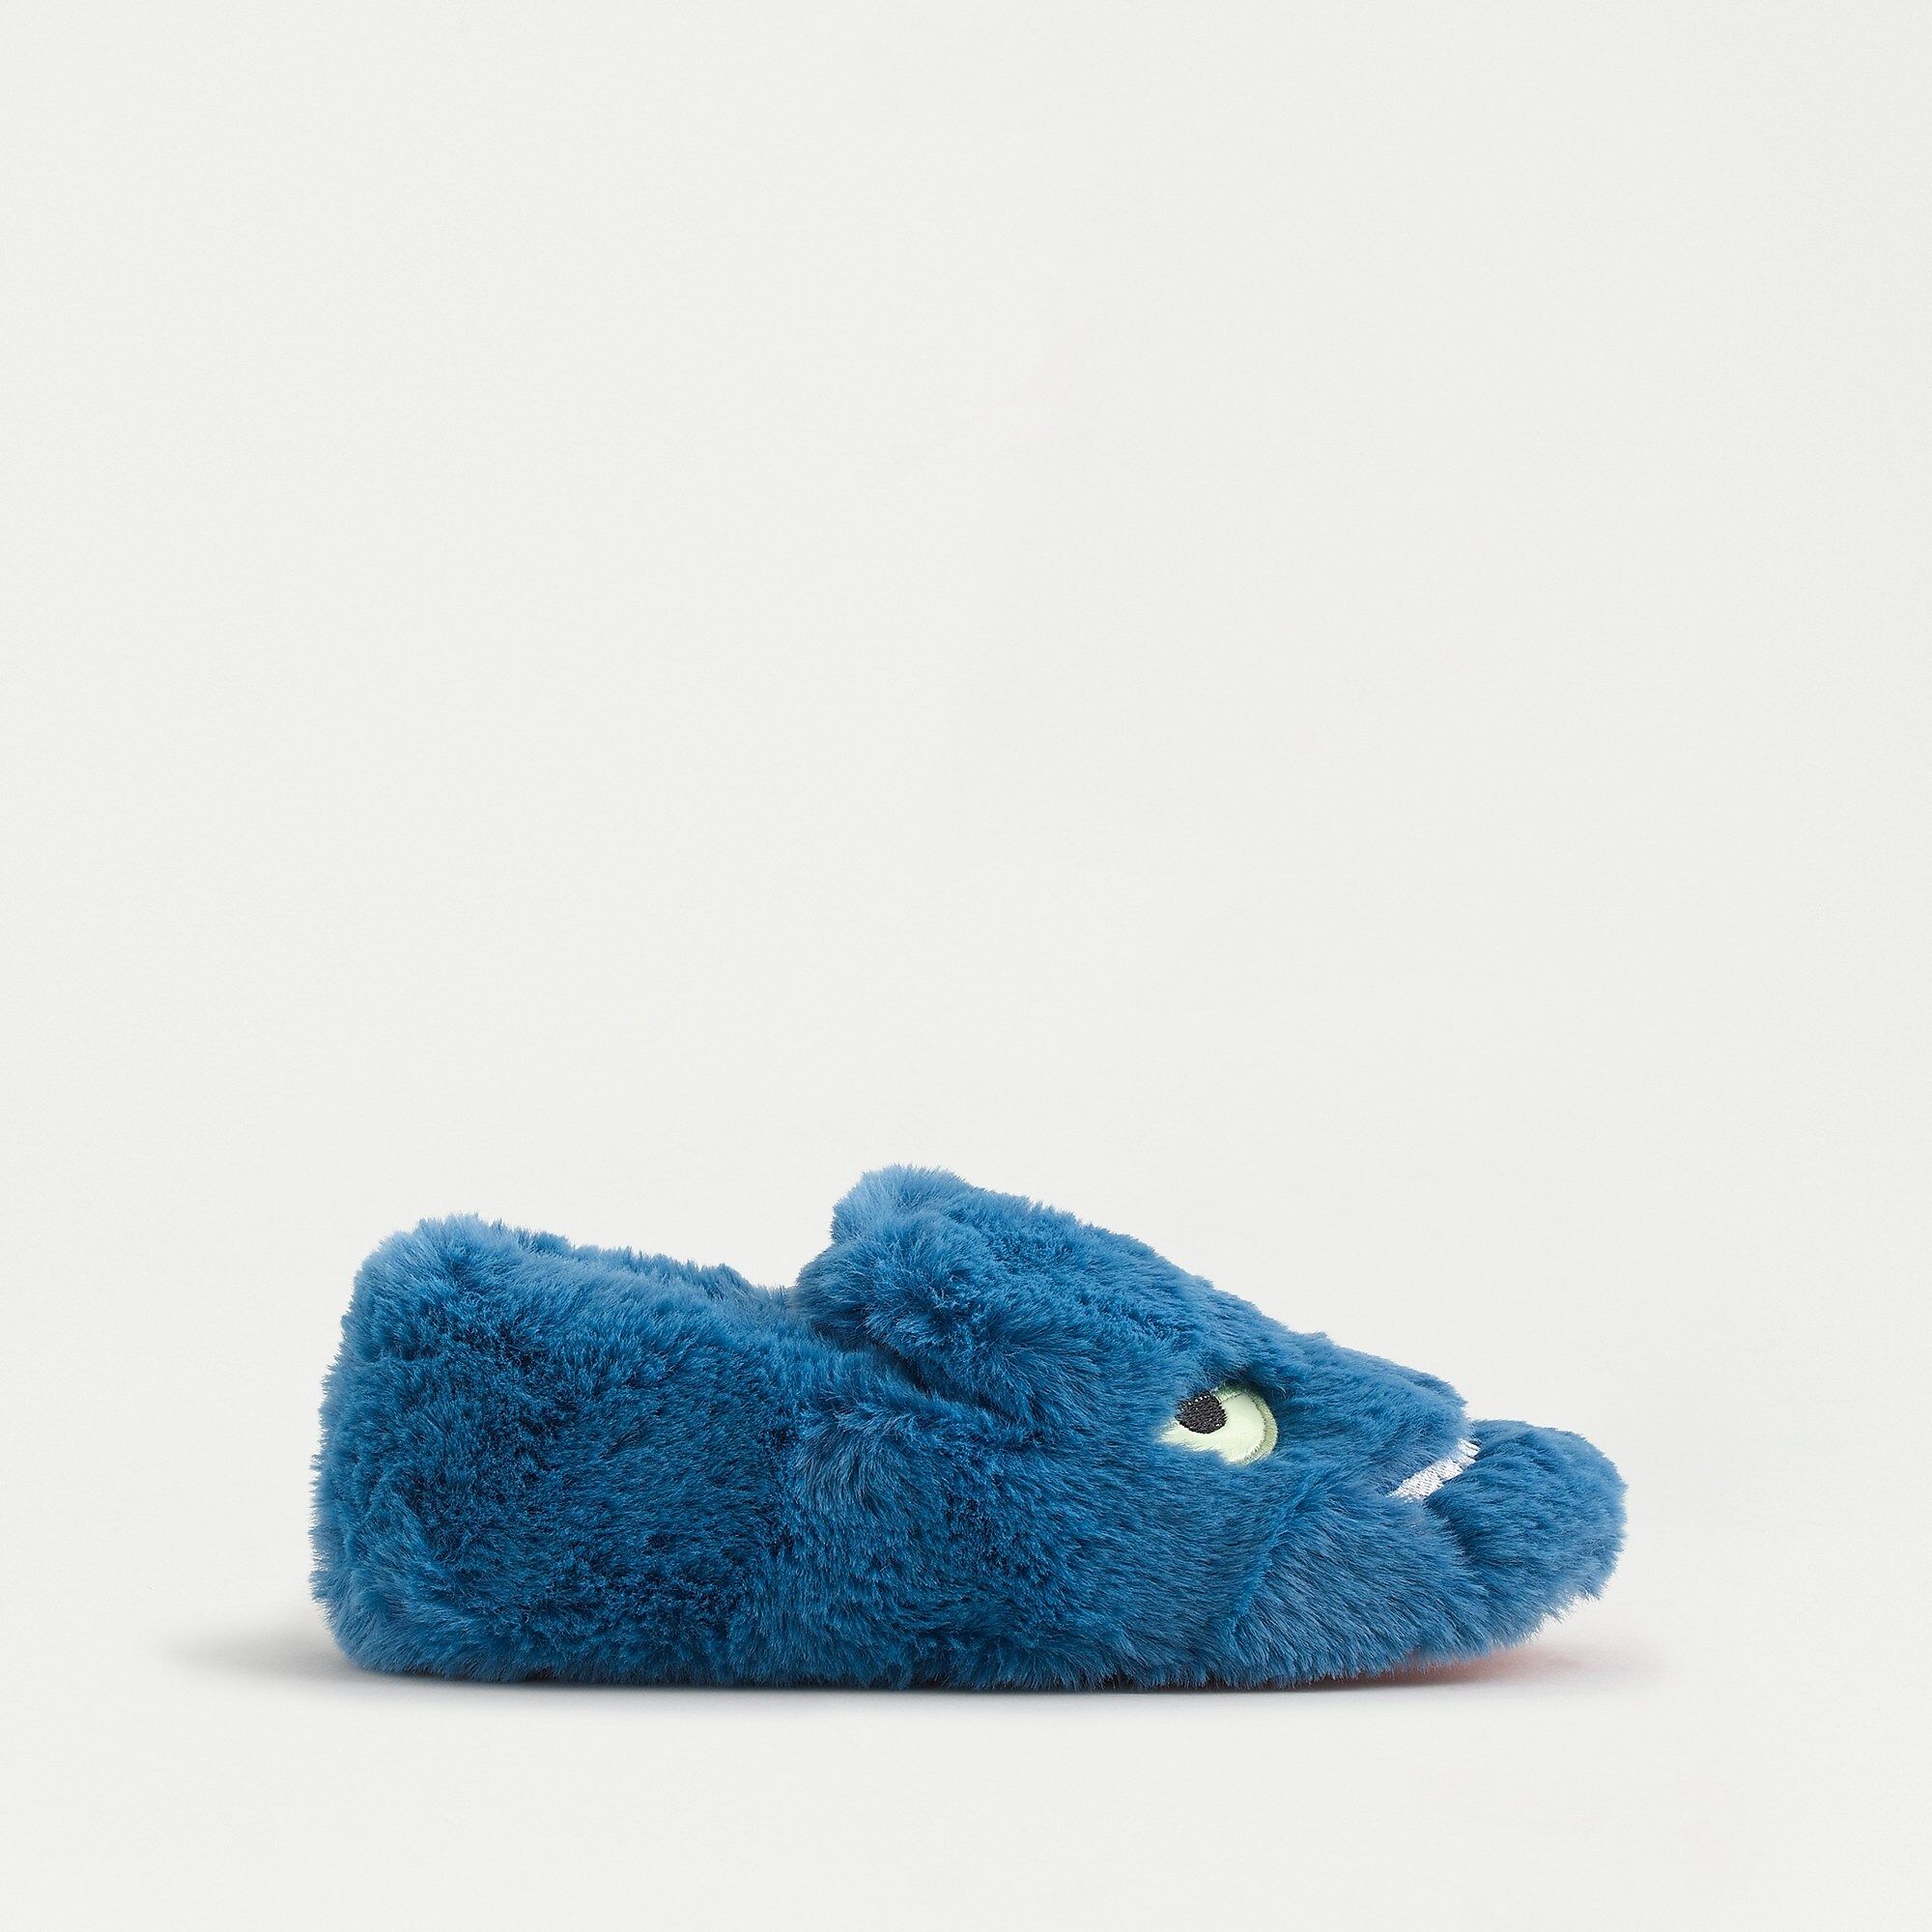 Kids' fuzzy monster slippers with glow-in-the-dark eyes | J.Crew US